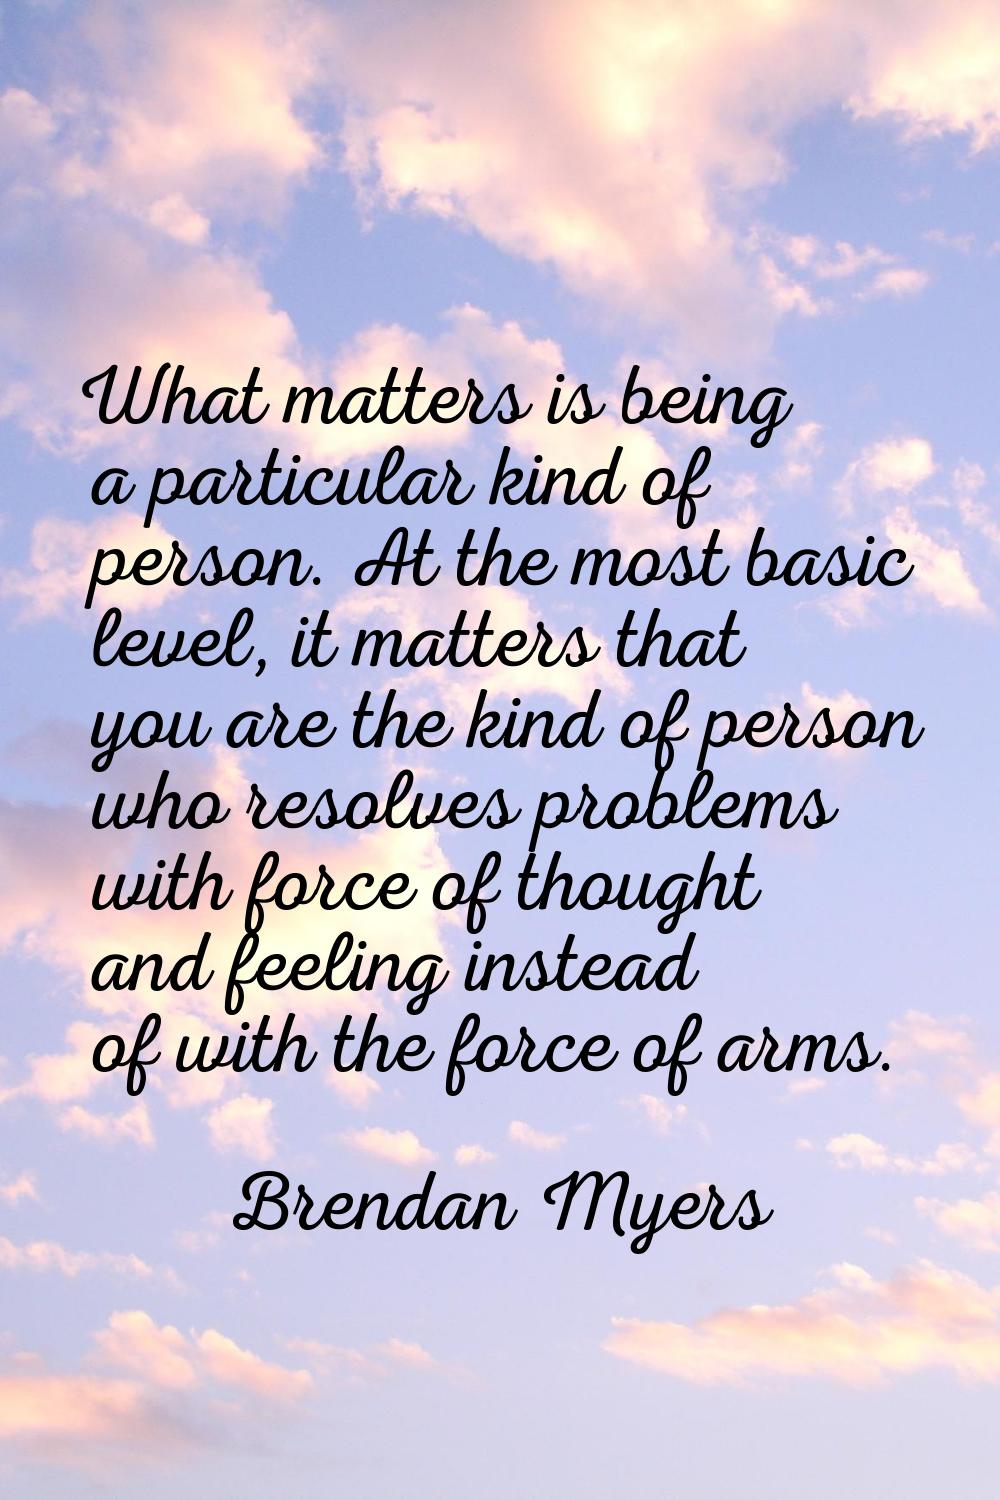 What matters is being a particular kind of person. At the most basic level, it matters that you are